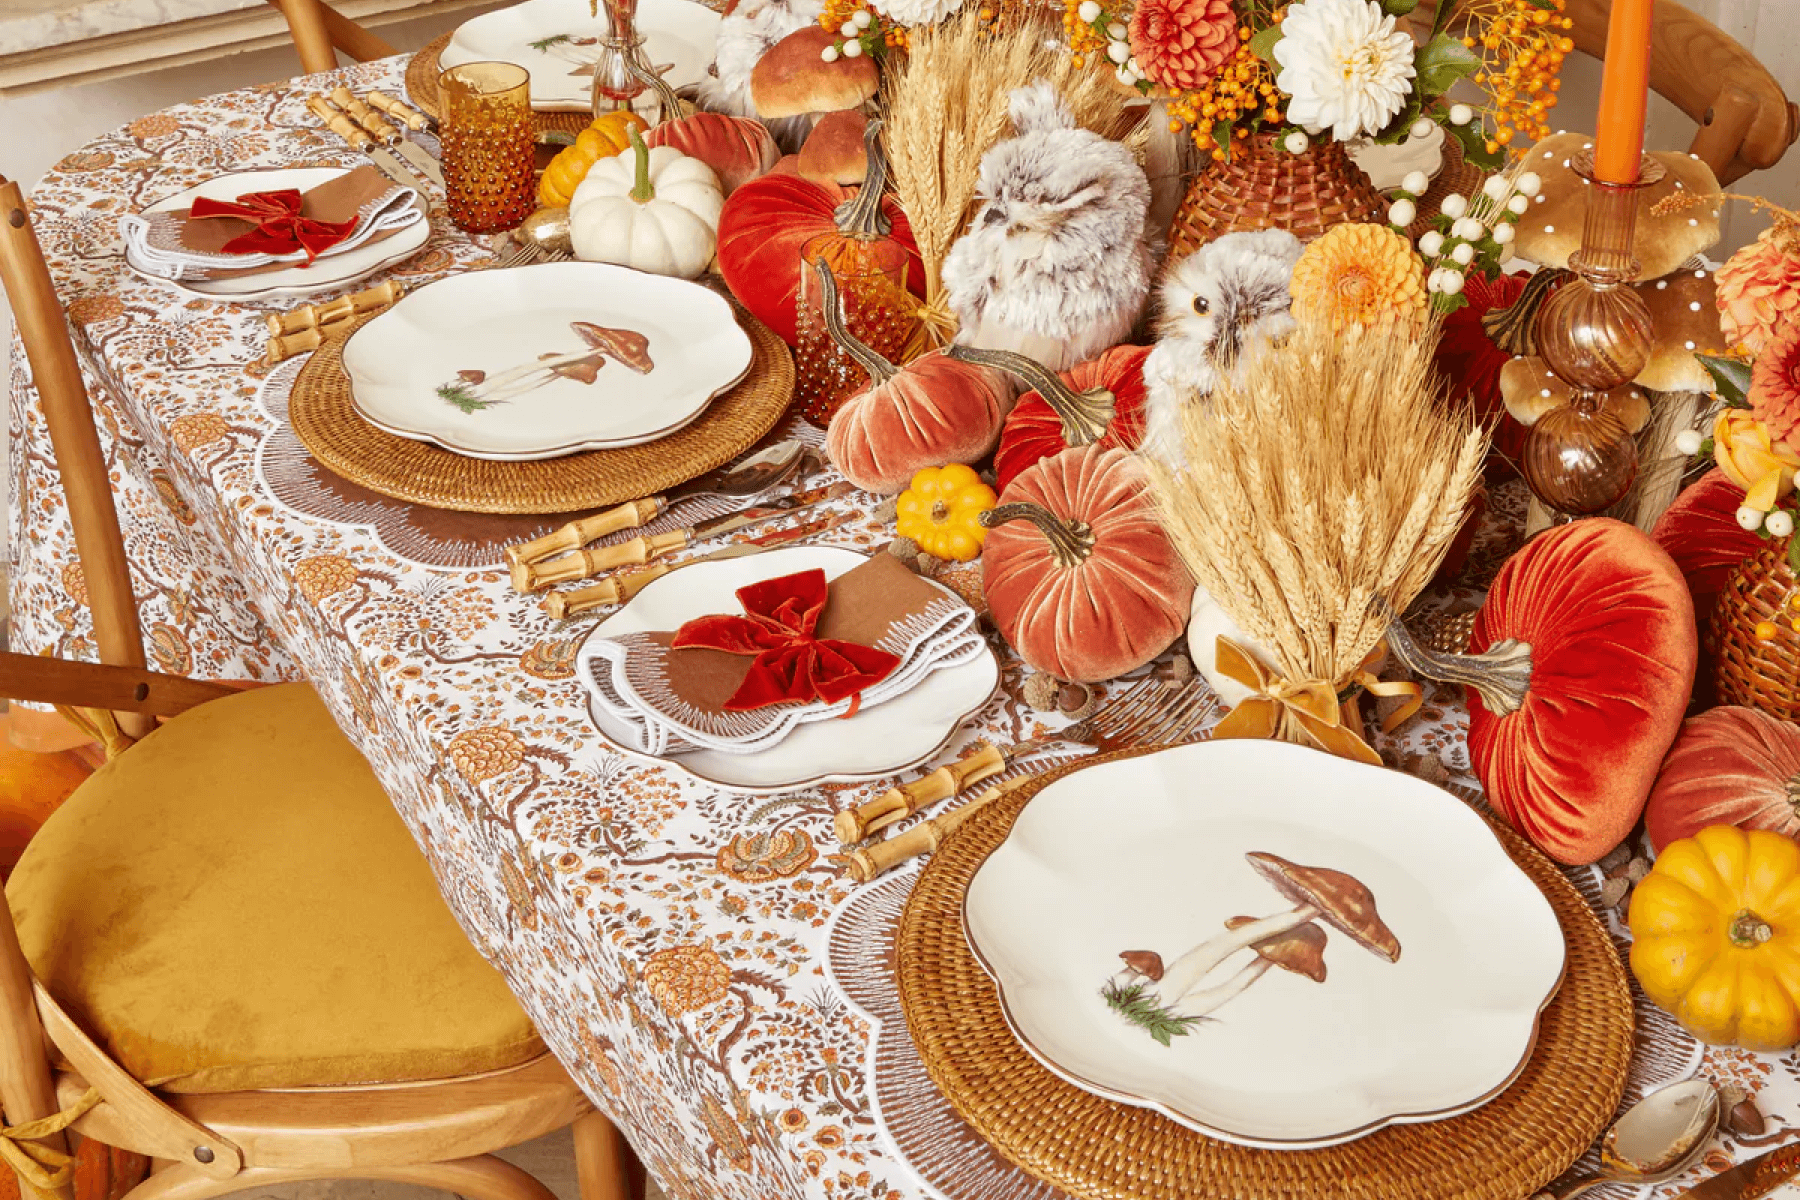 An image of an autumnal table setting replete with velvet pumpkins, stuffed owls, wheat bundles, and mushroom plates.